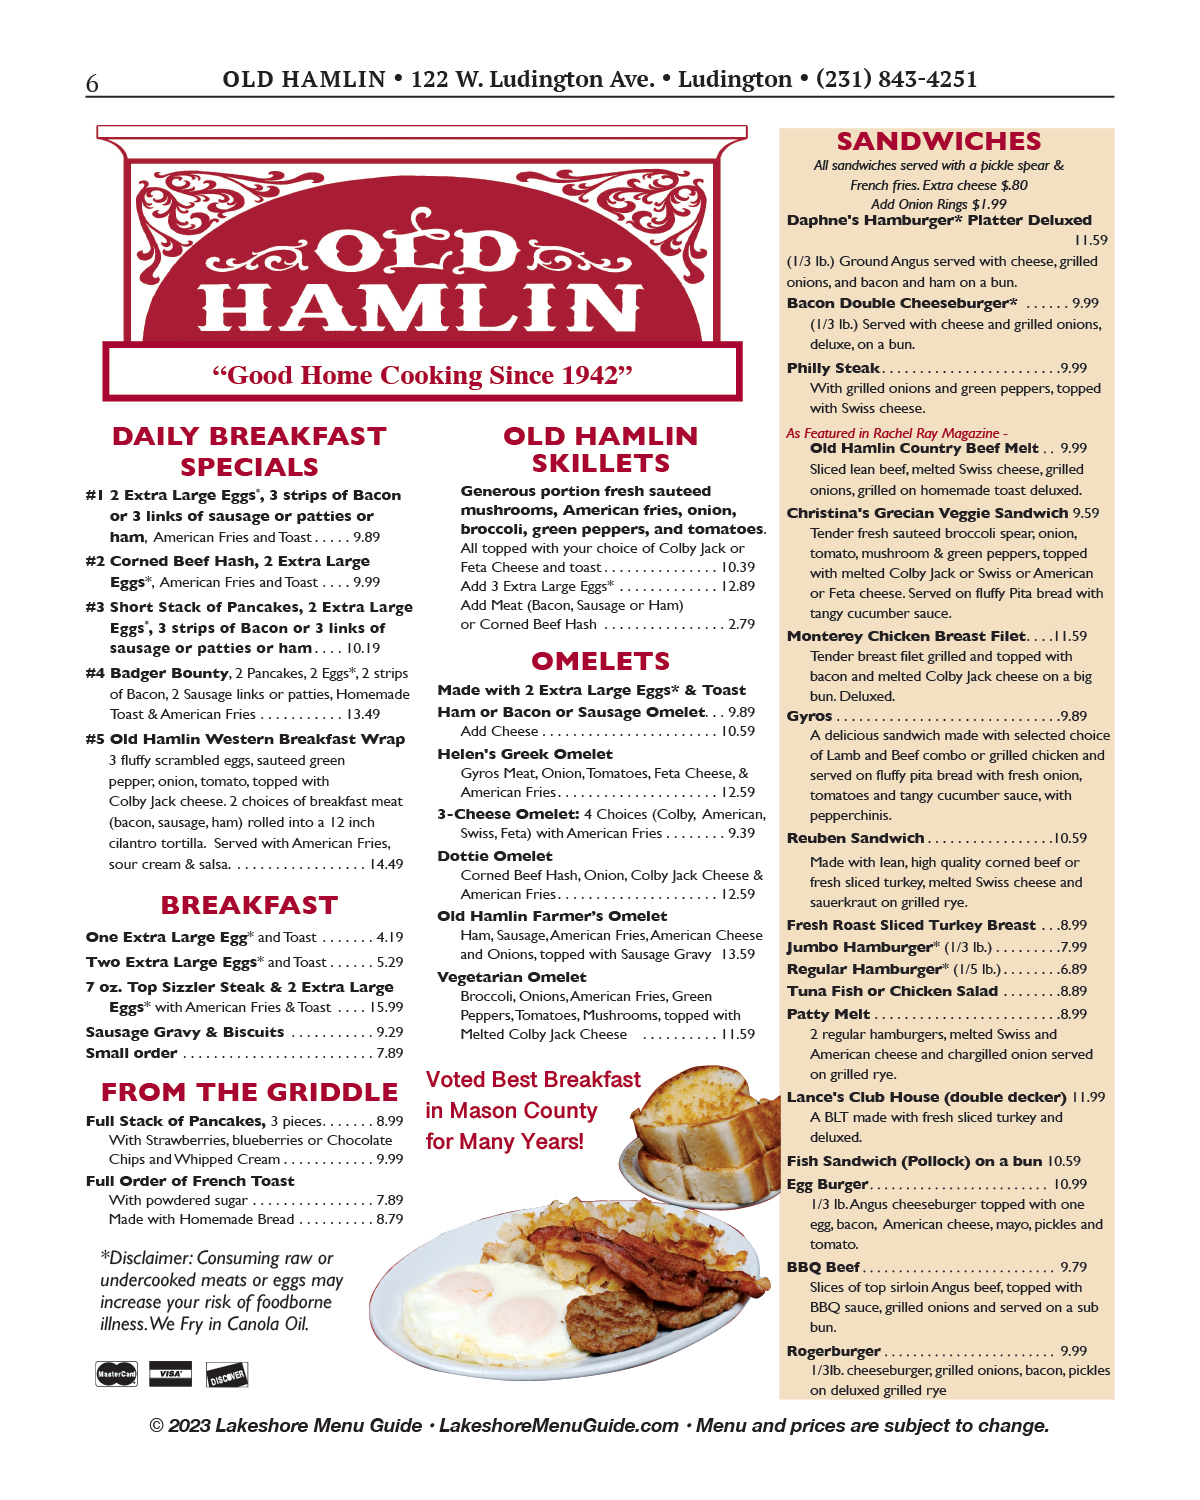 Menu for the Old Hamlin Restaurant in downtown Ludington from the Lakeshore Menu Guide